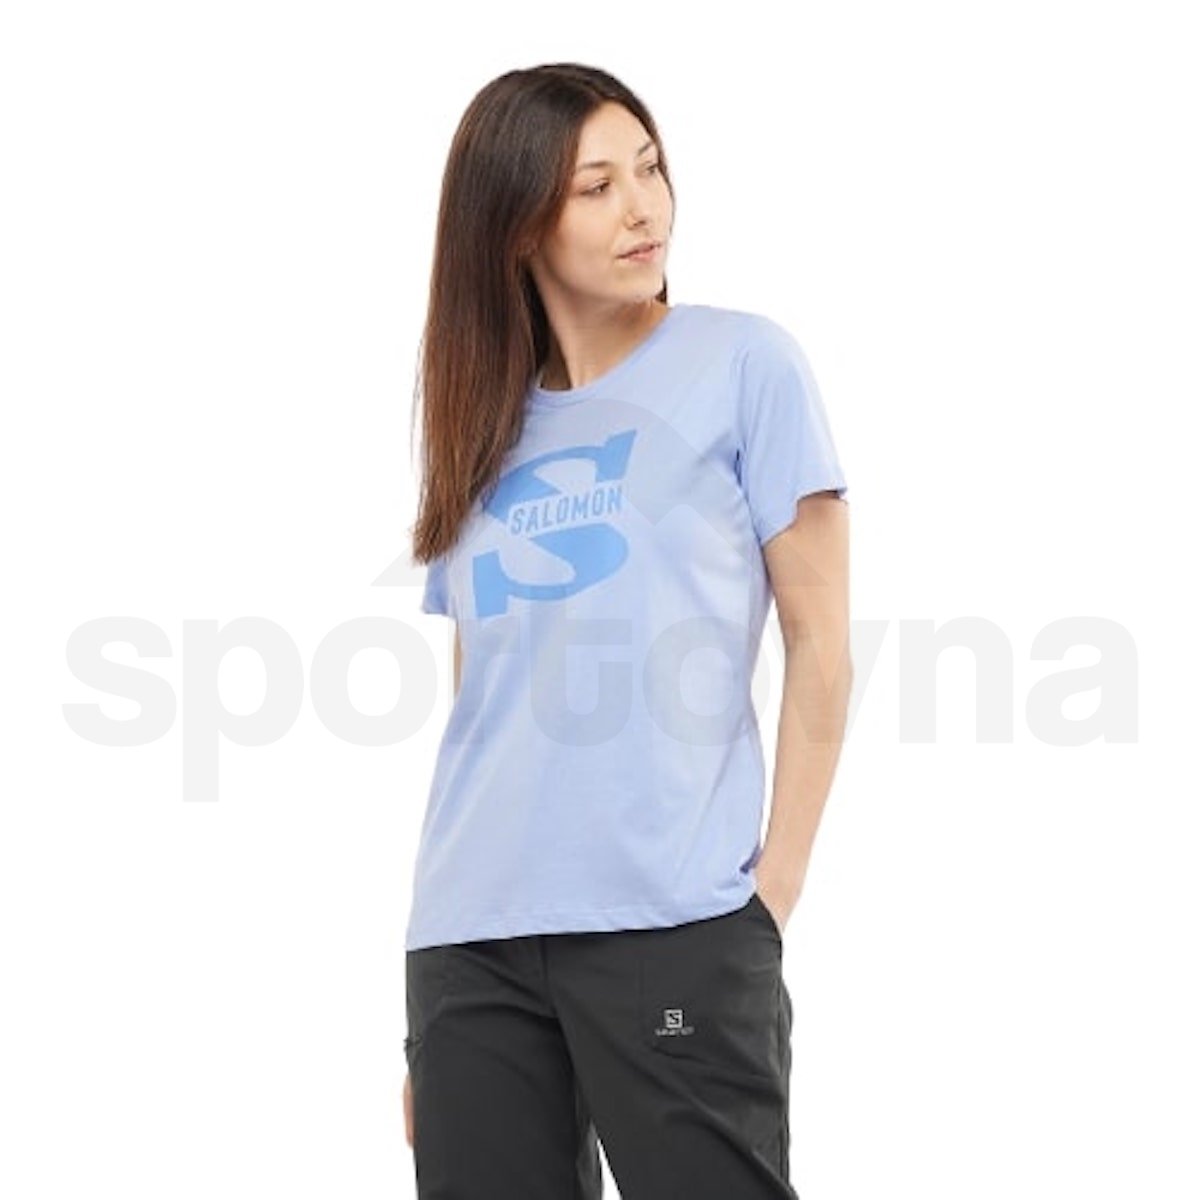 LC1798200_0_MOD_outlifebiglogotee_serenity_sportswear_w.png.cq5dam.web.1200.1200-removebg-preview